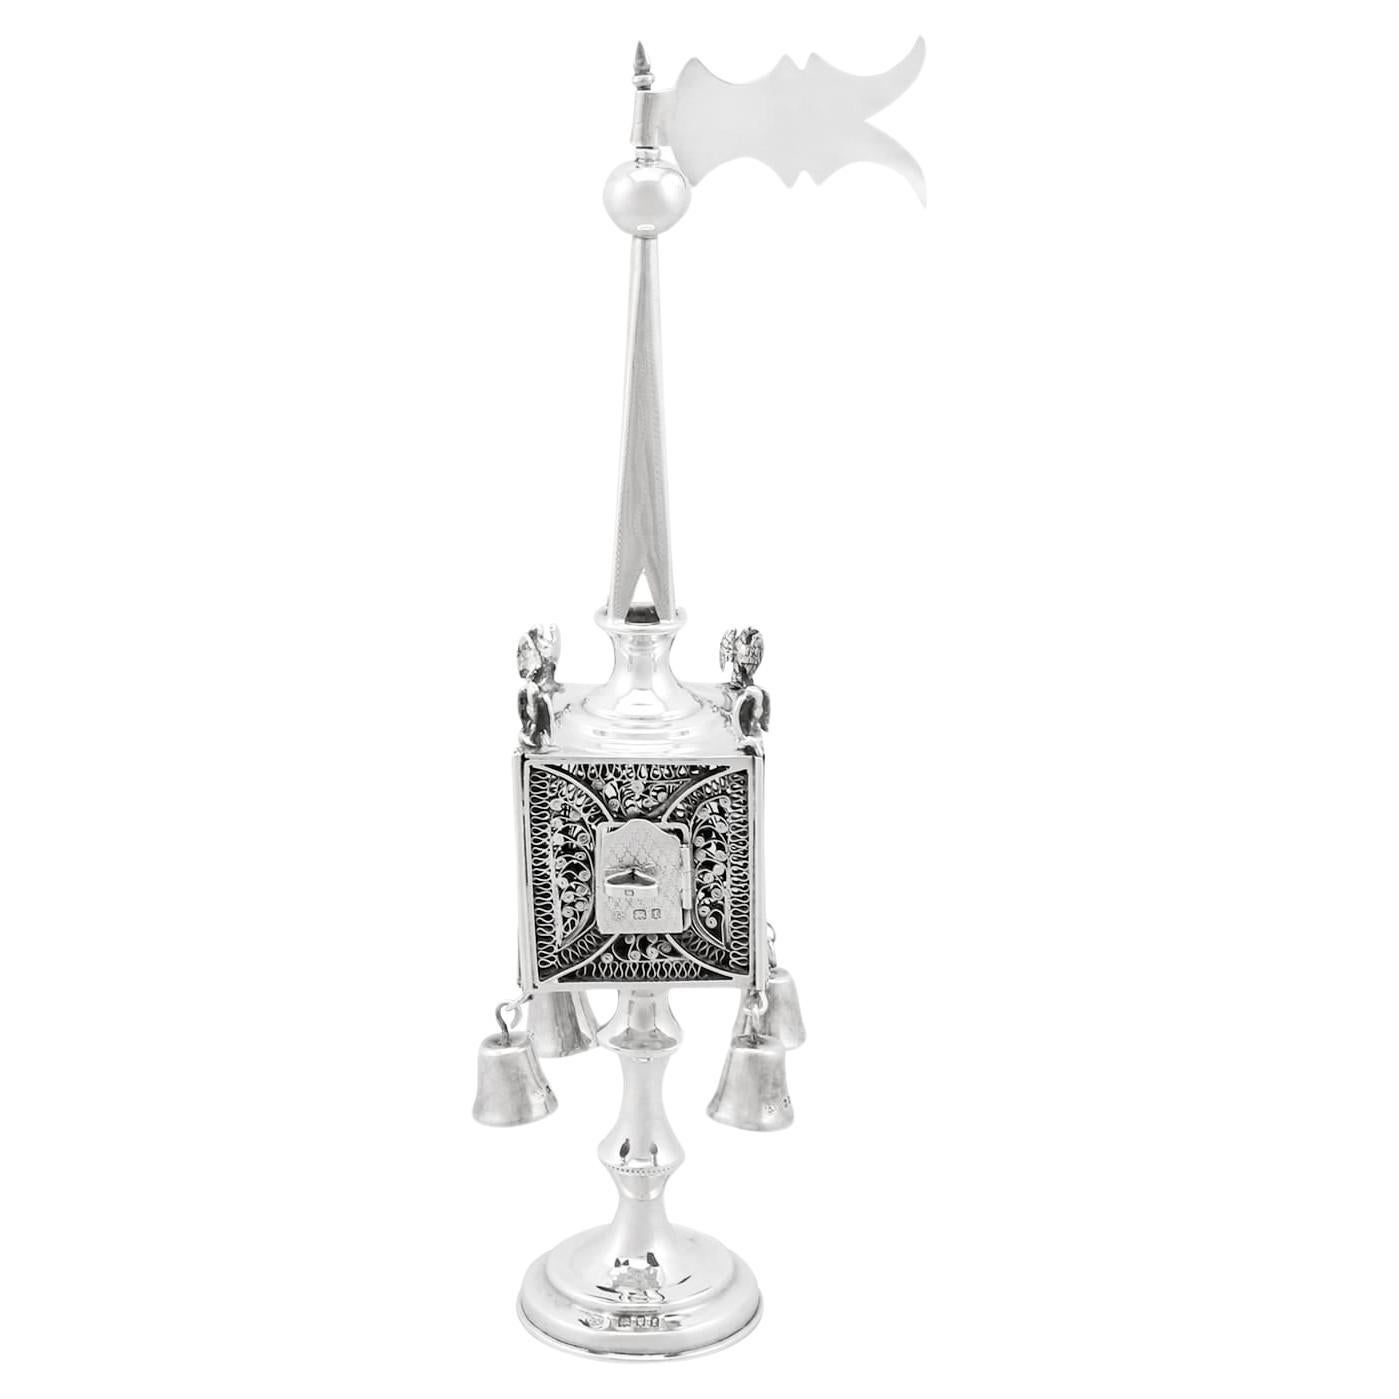 1921 Sterling Silver Spice Tower